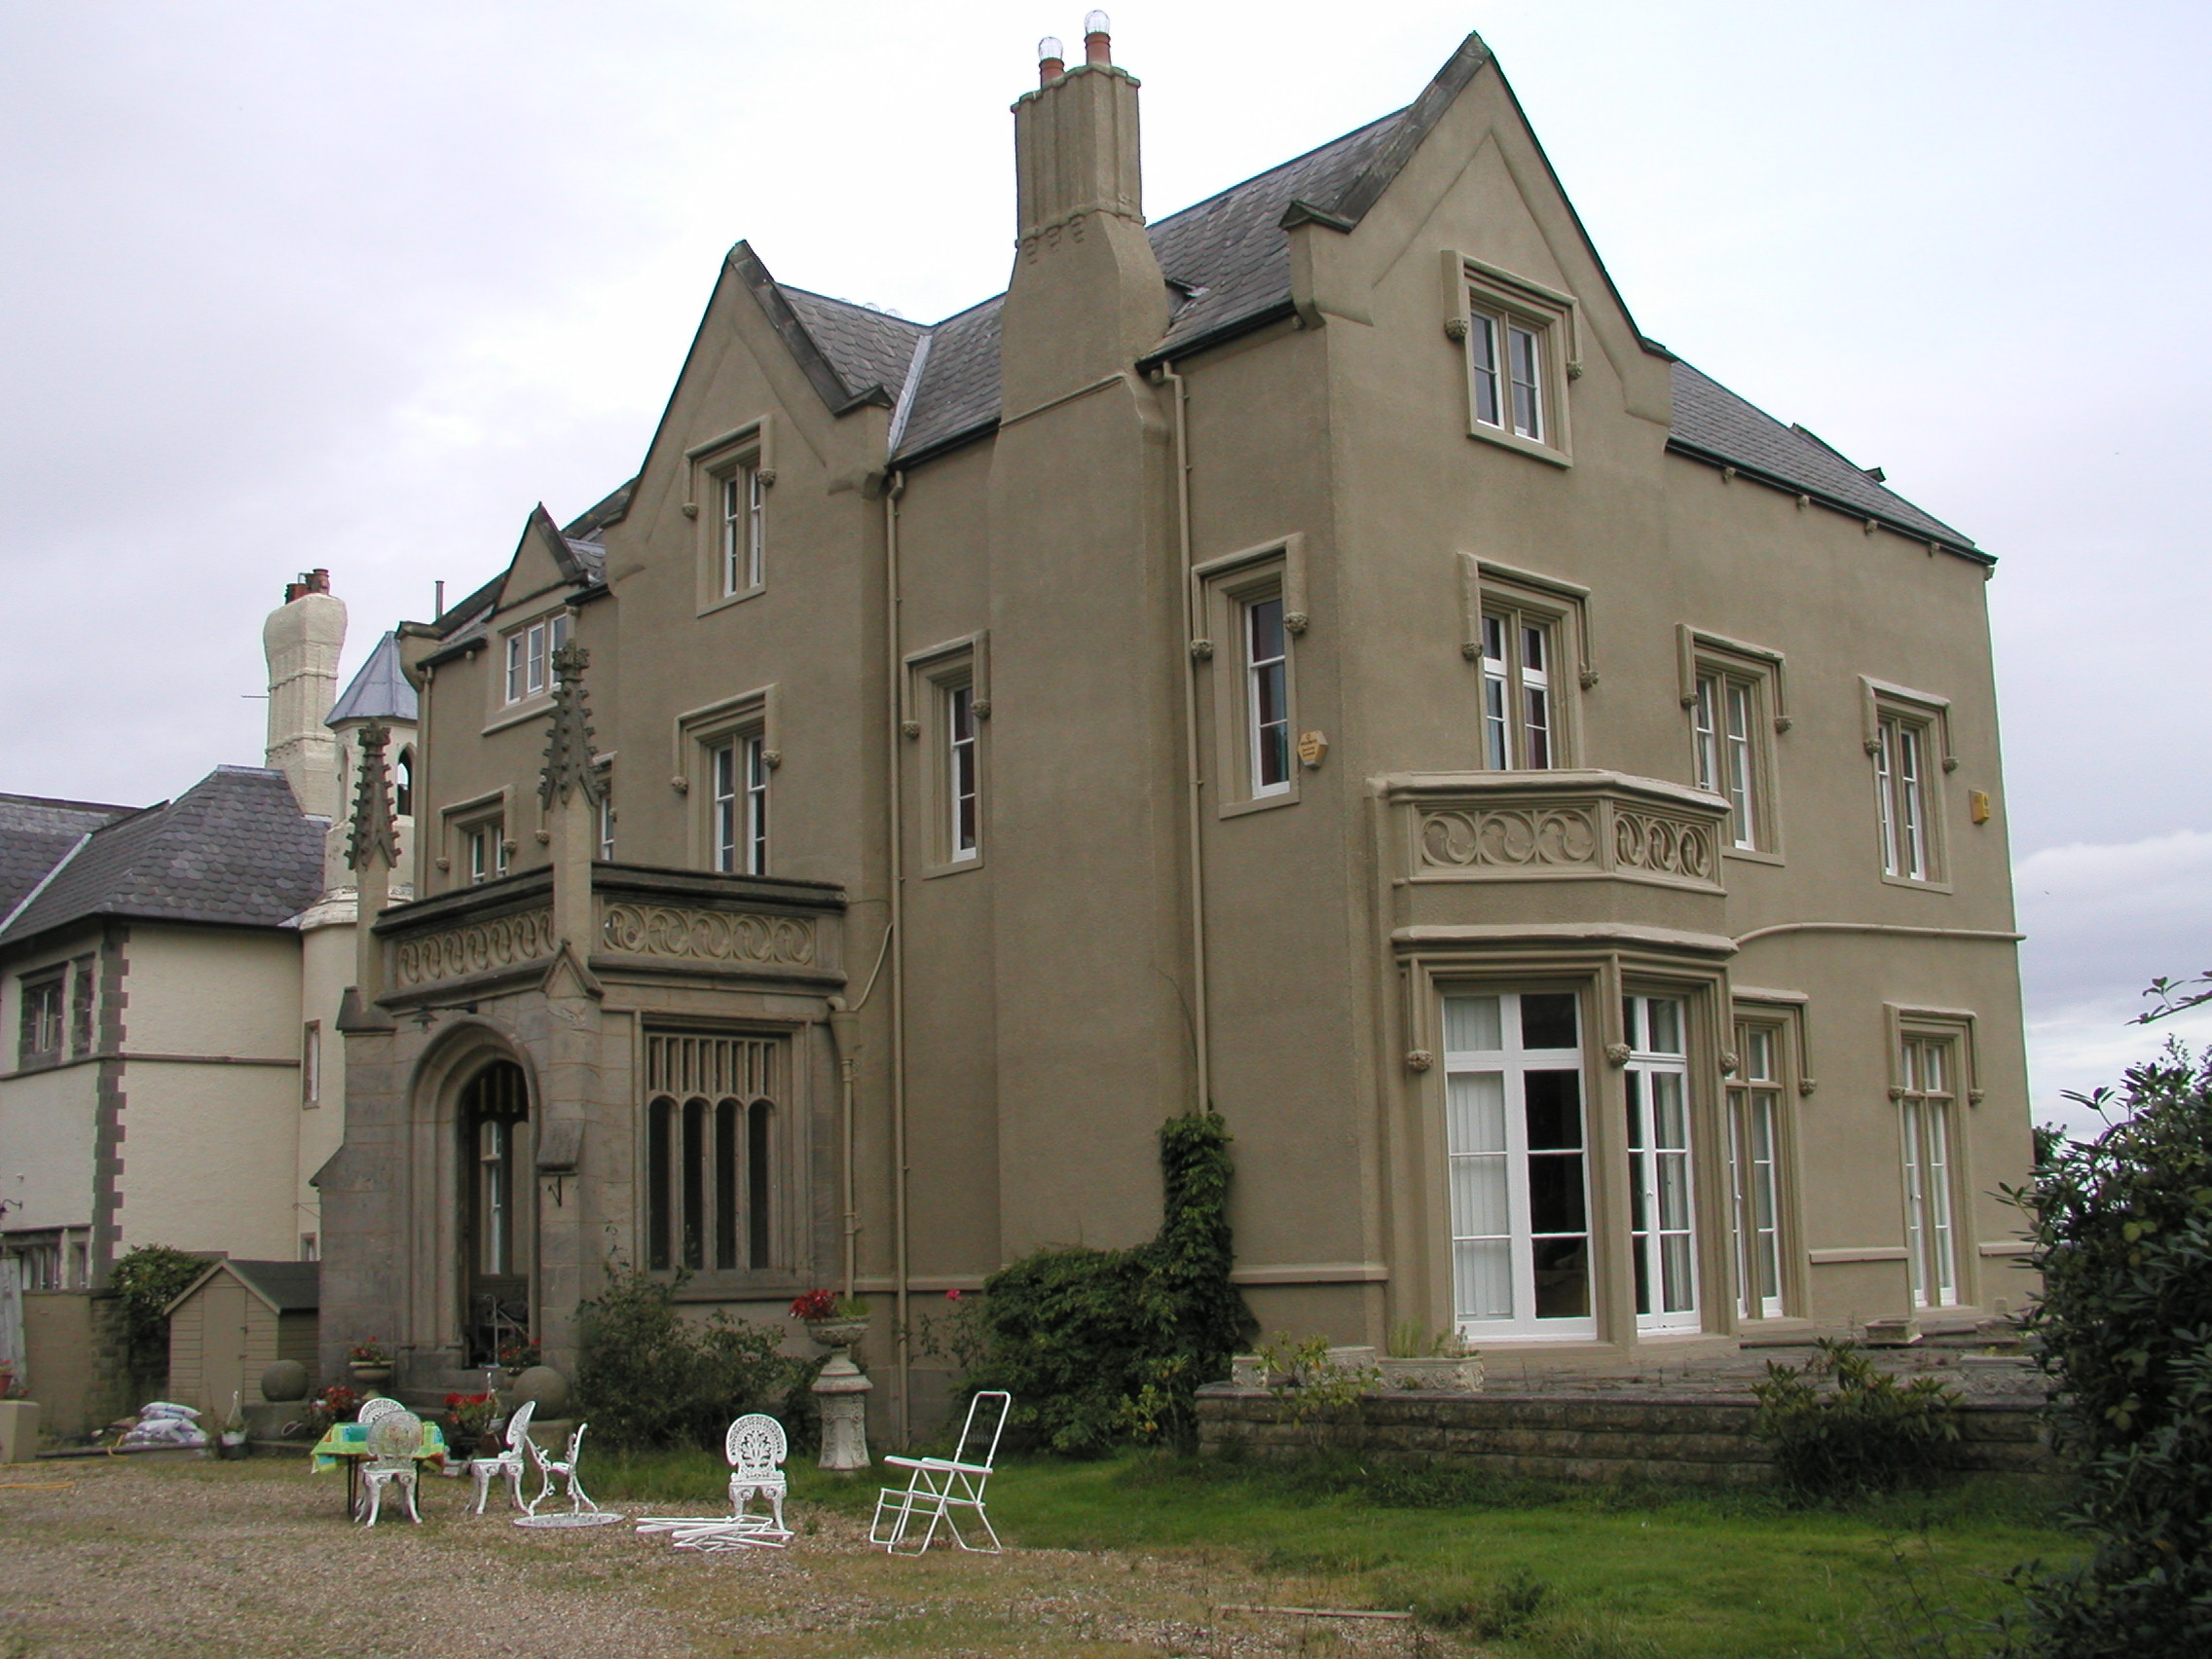 JPEG image - Norley Hall - front ...